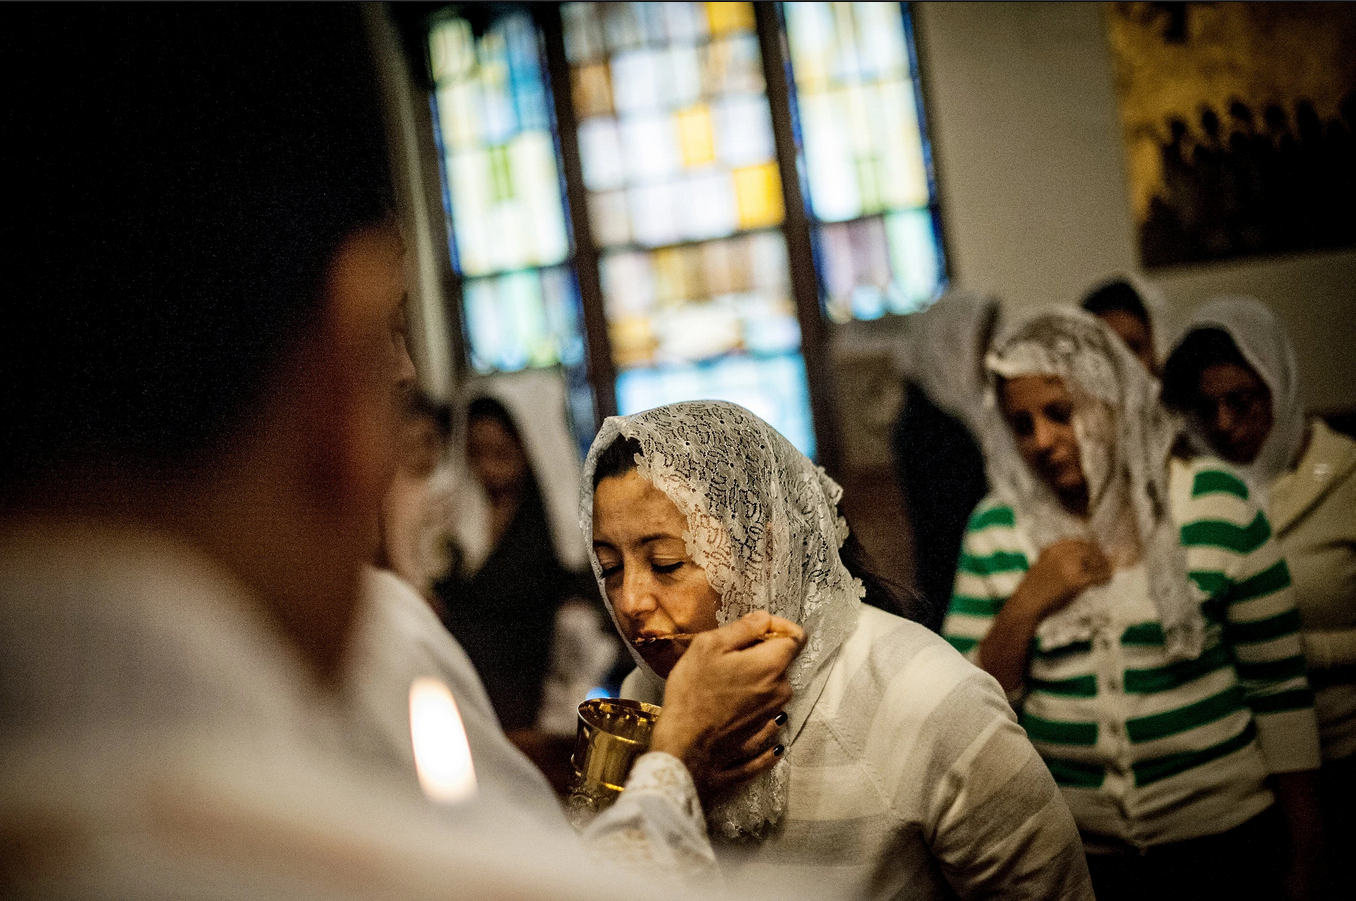 Finding Refuge From Unrest in Egypt (New York Times)